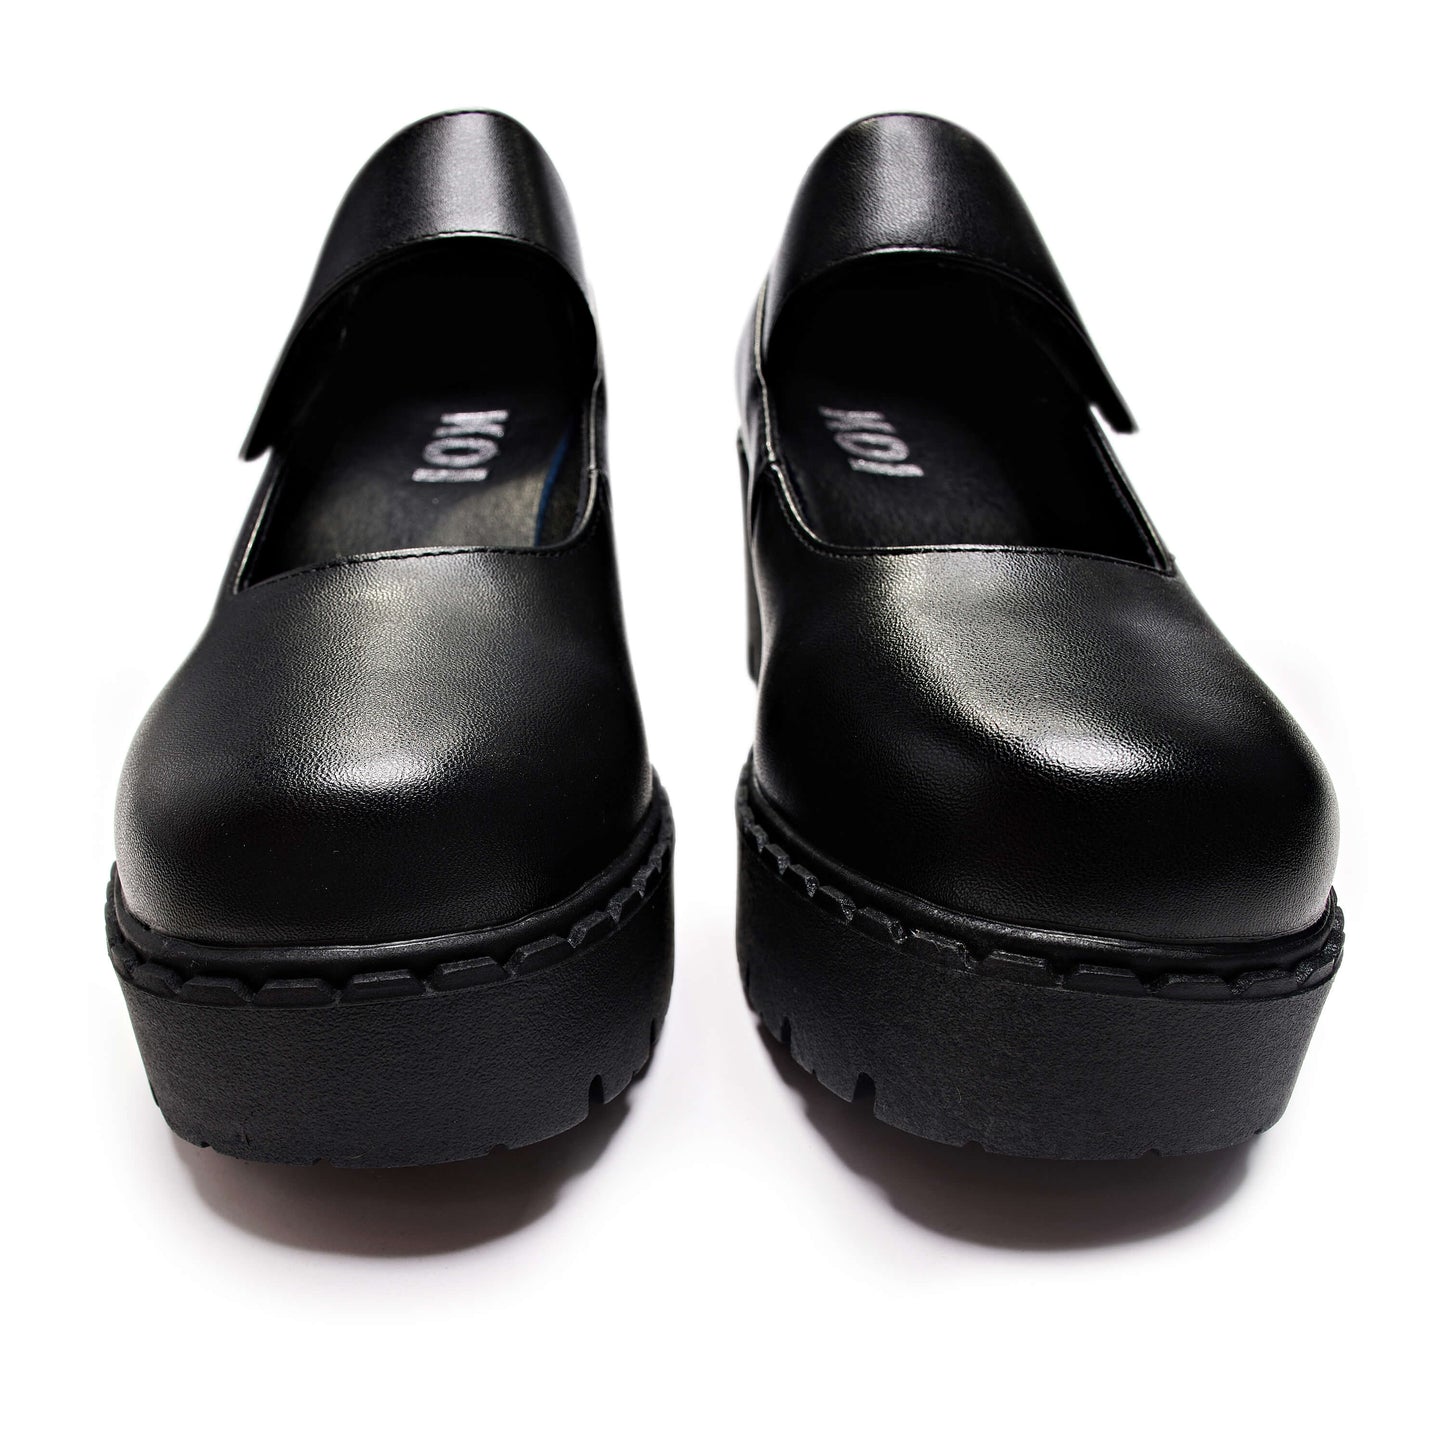 Beacons Switch Mary Jane Shoes - Mary Janes - KOI Footwear - Black - Front Detail